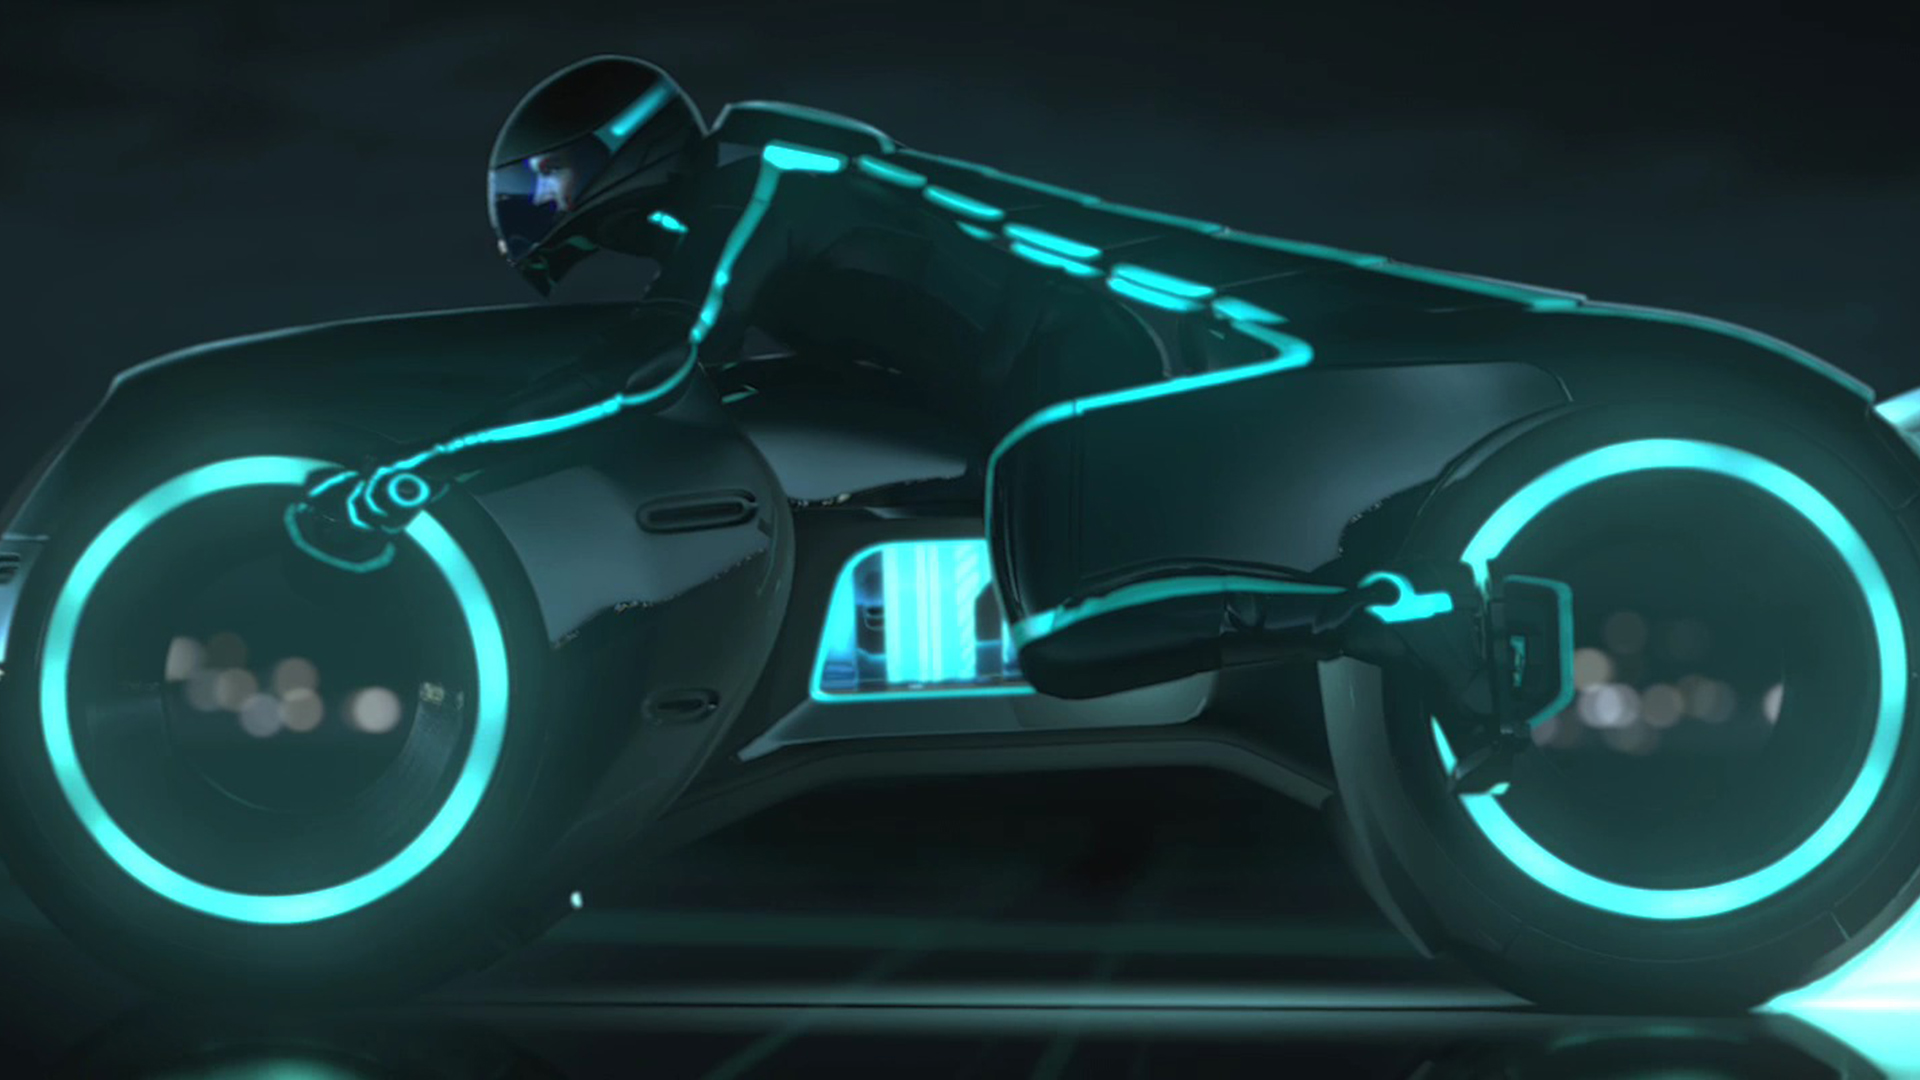 Tron Motorcycle Wallpapers